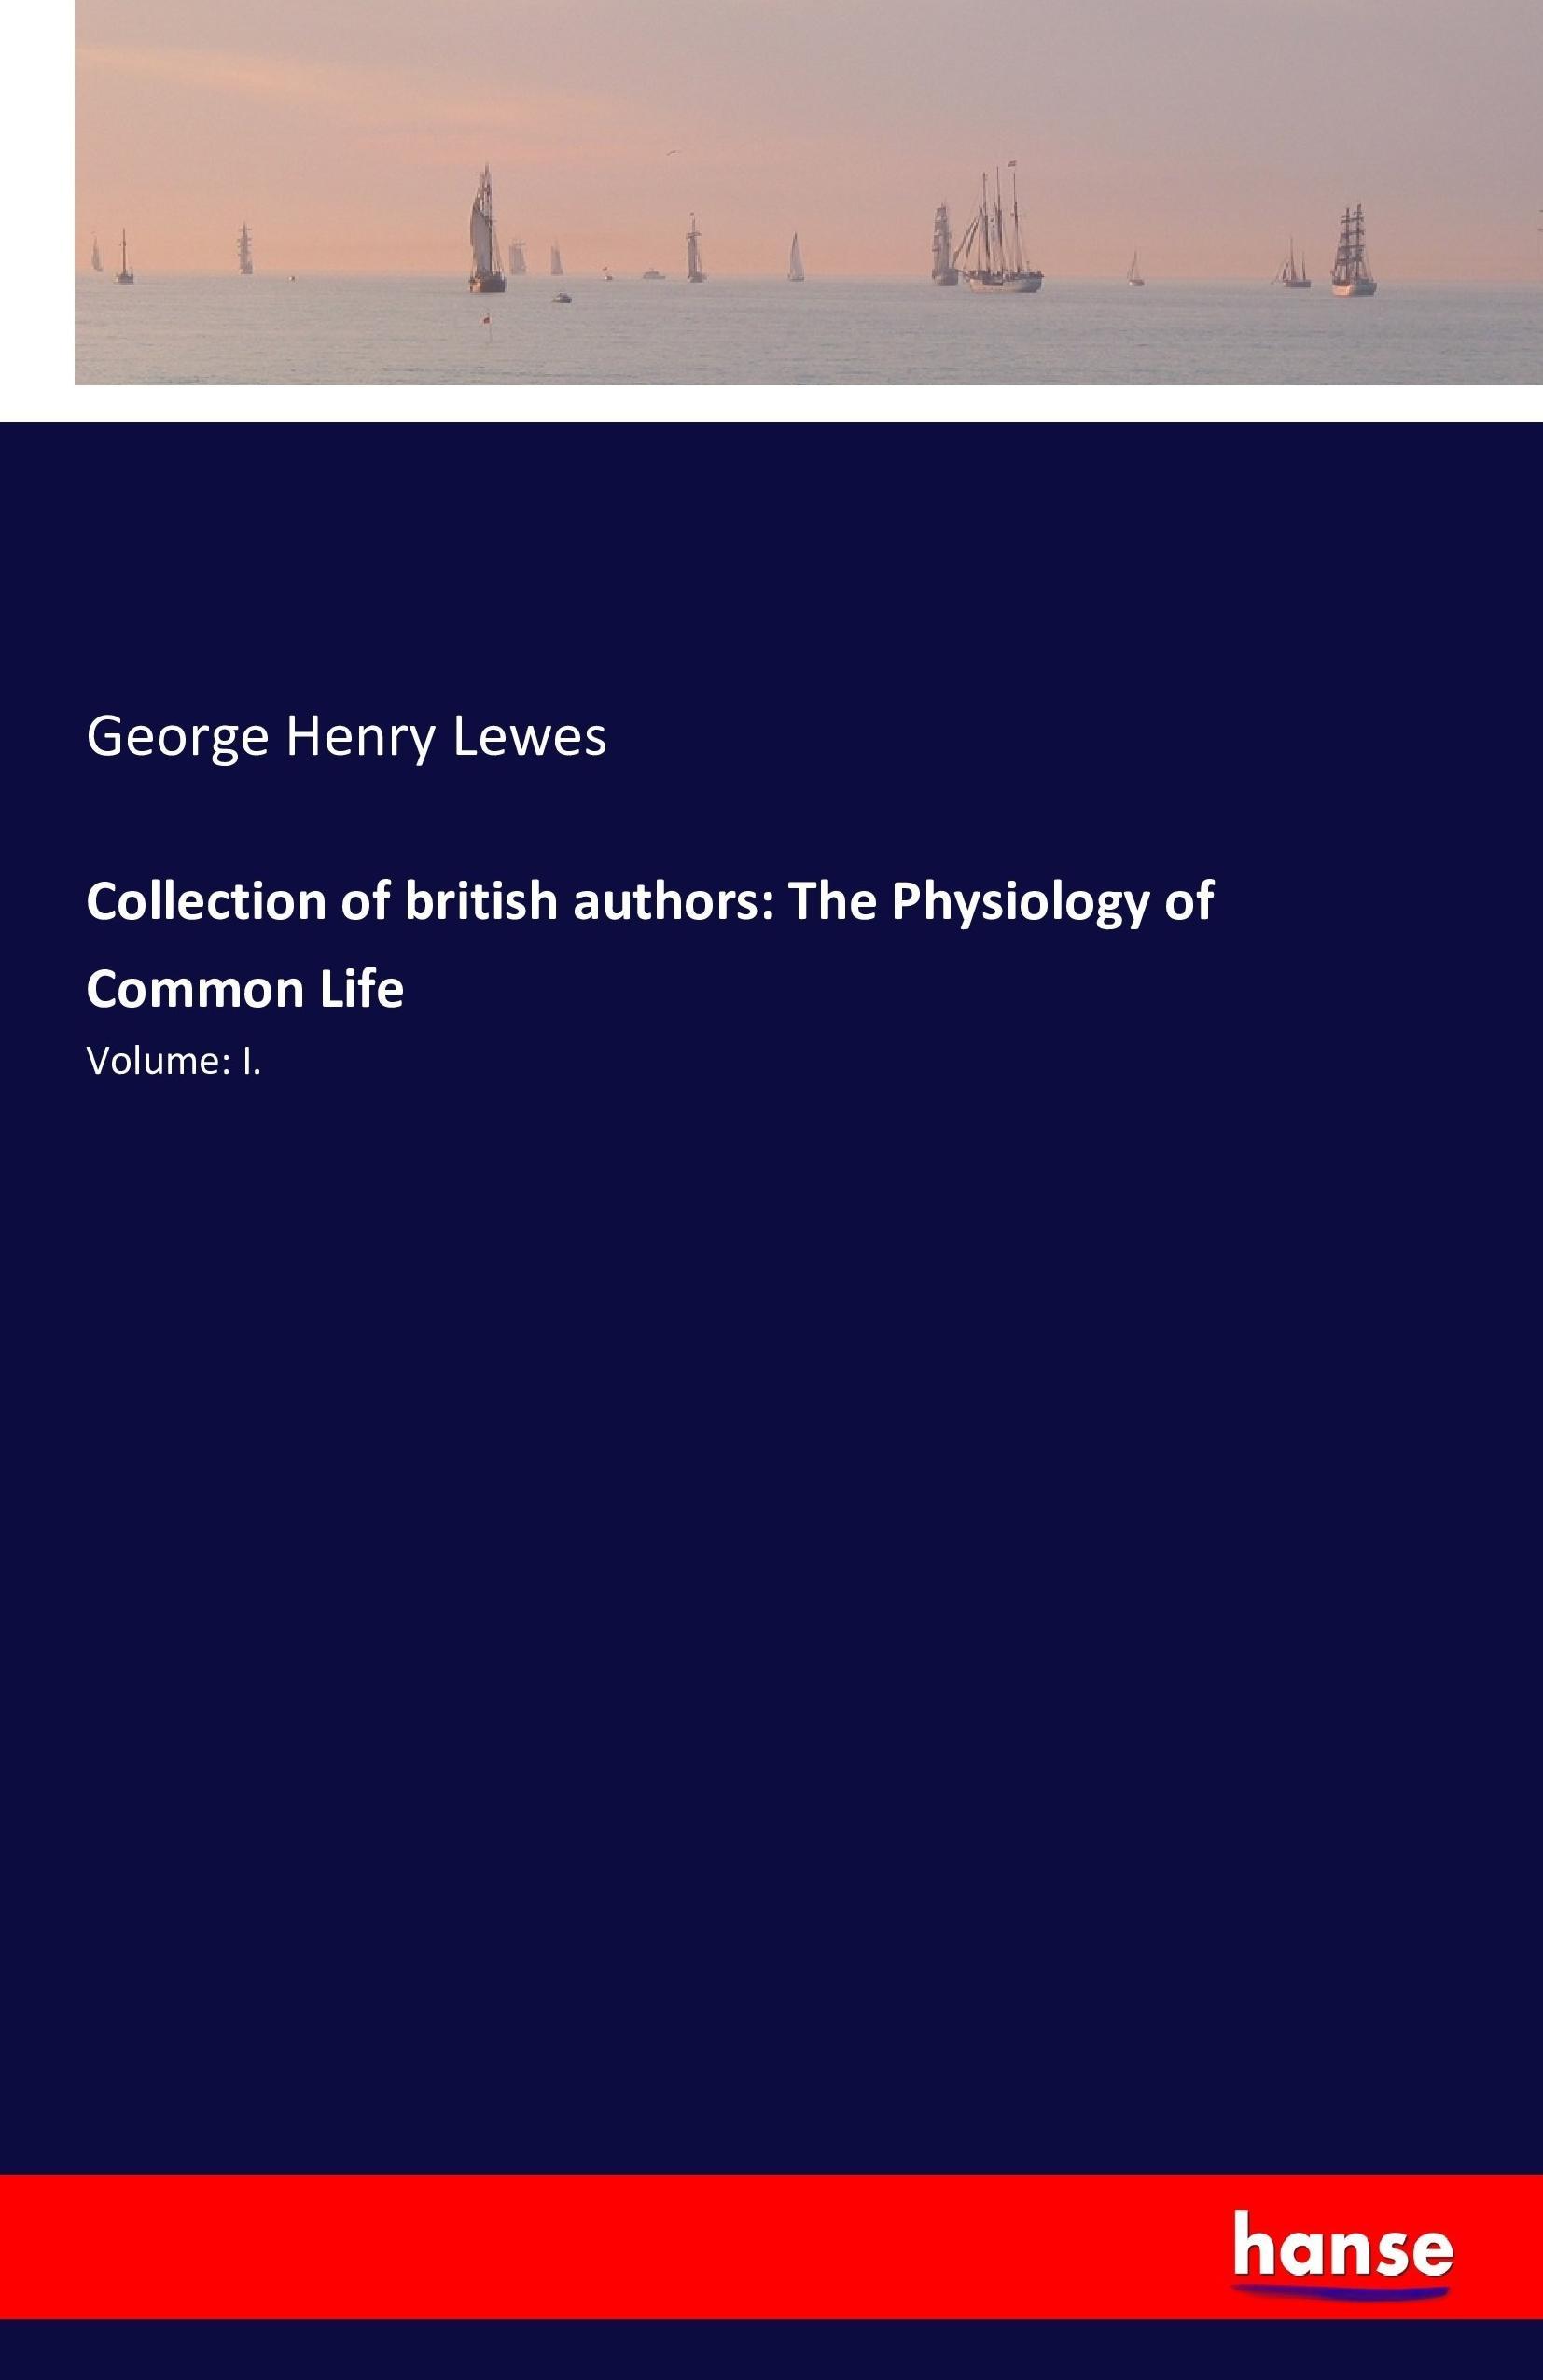 Collection of british authors: The Physiology of Common Life - Lewes, George Henry